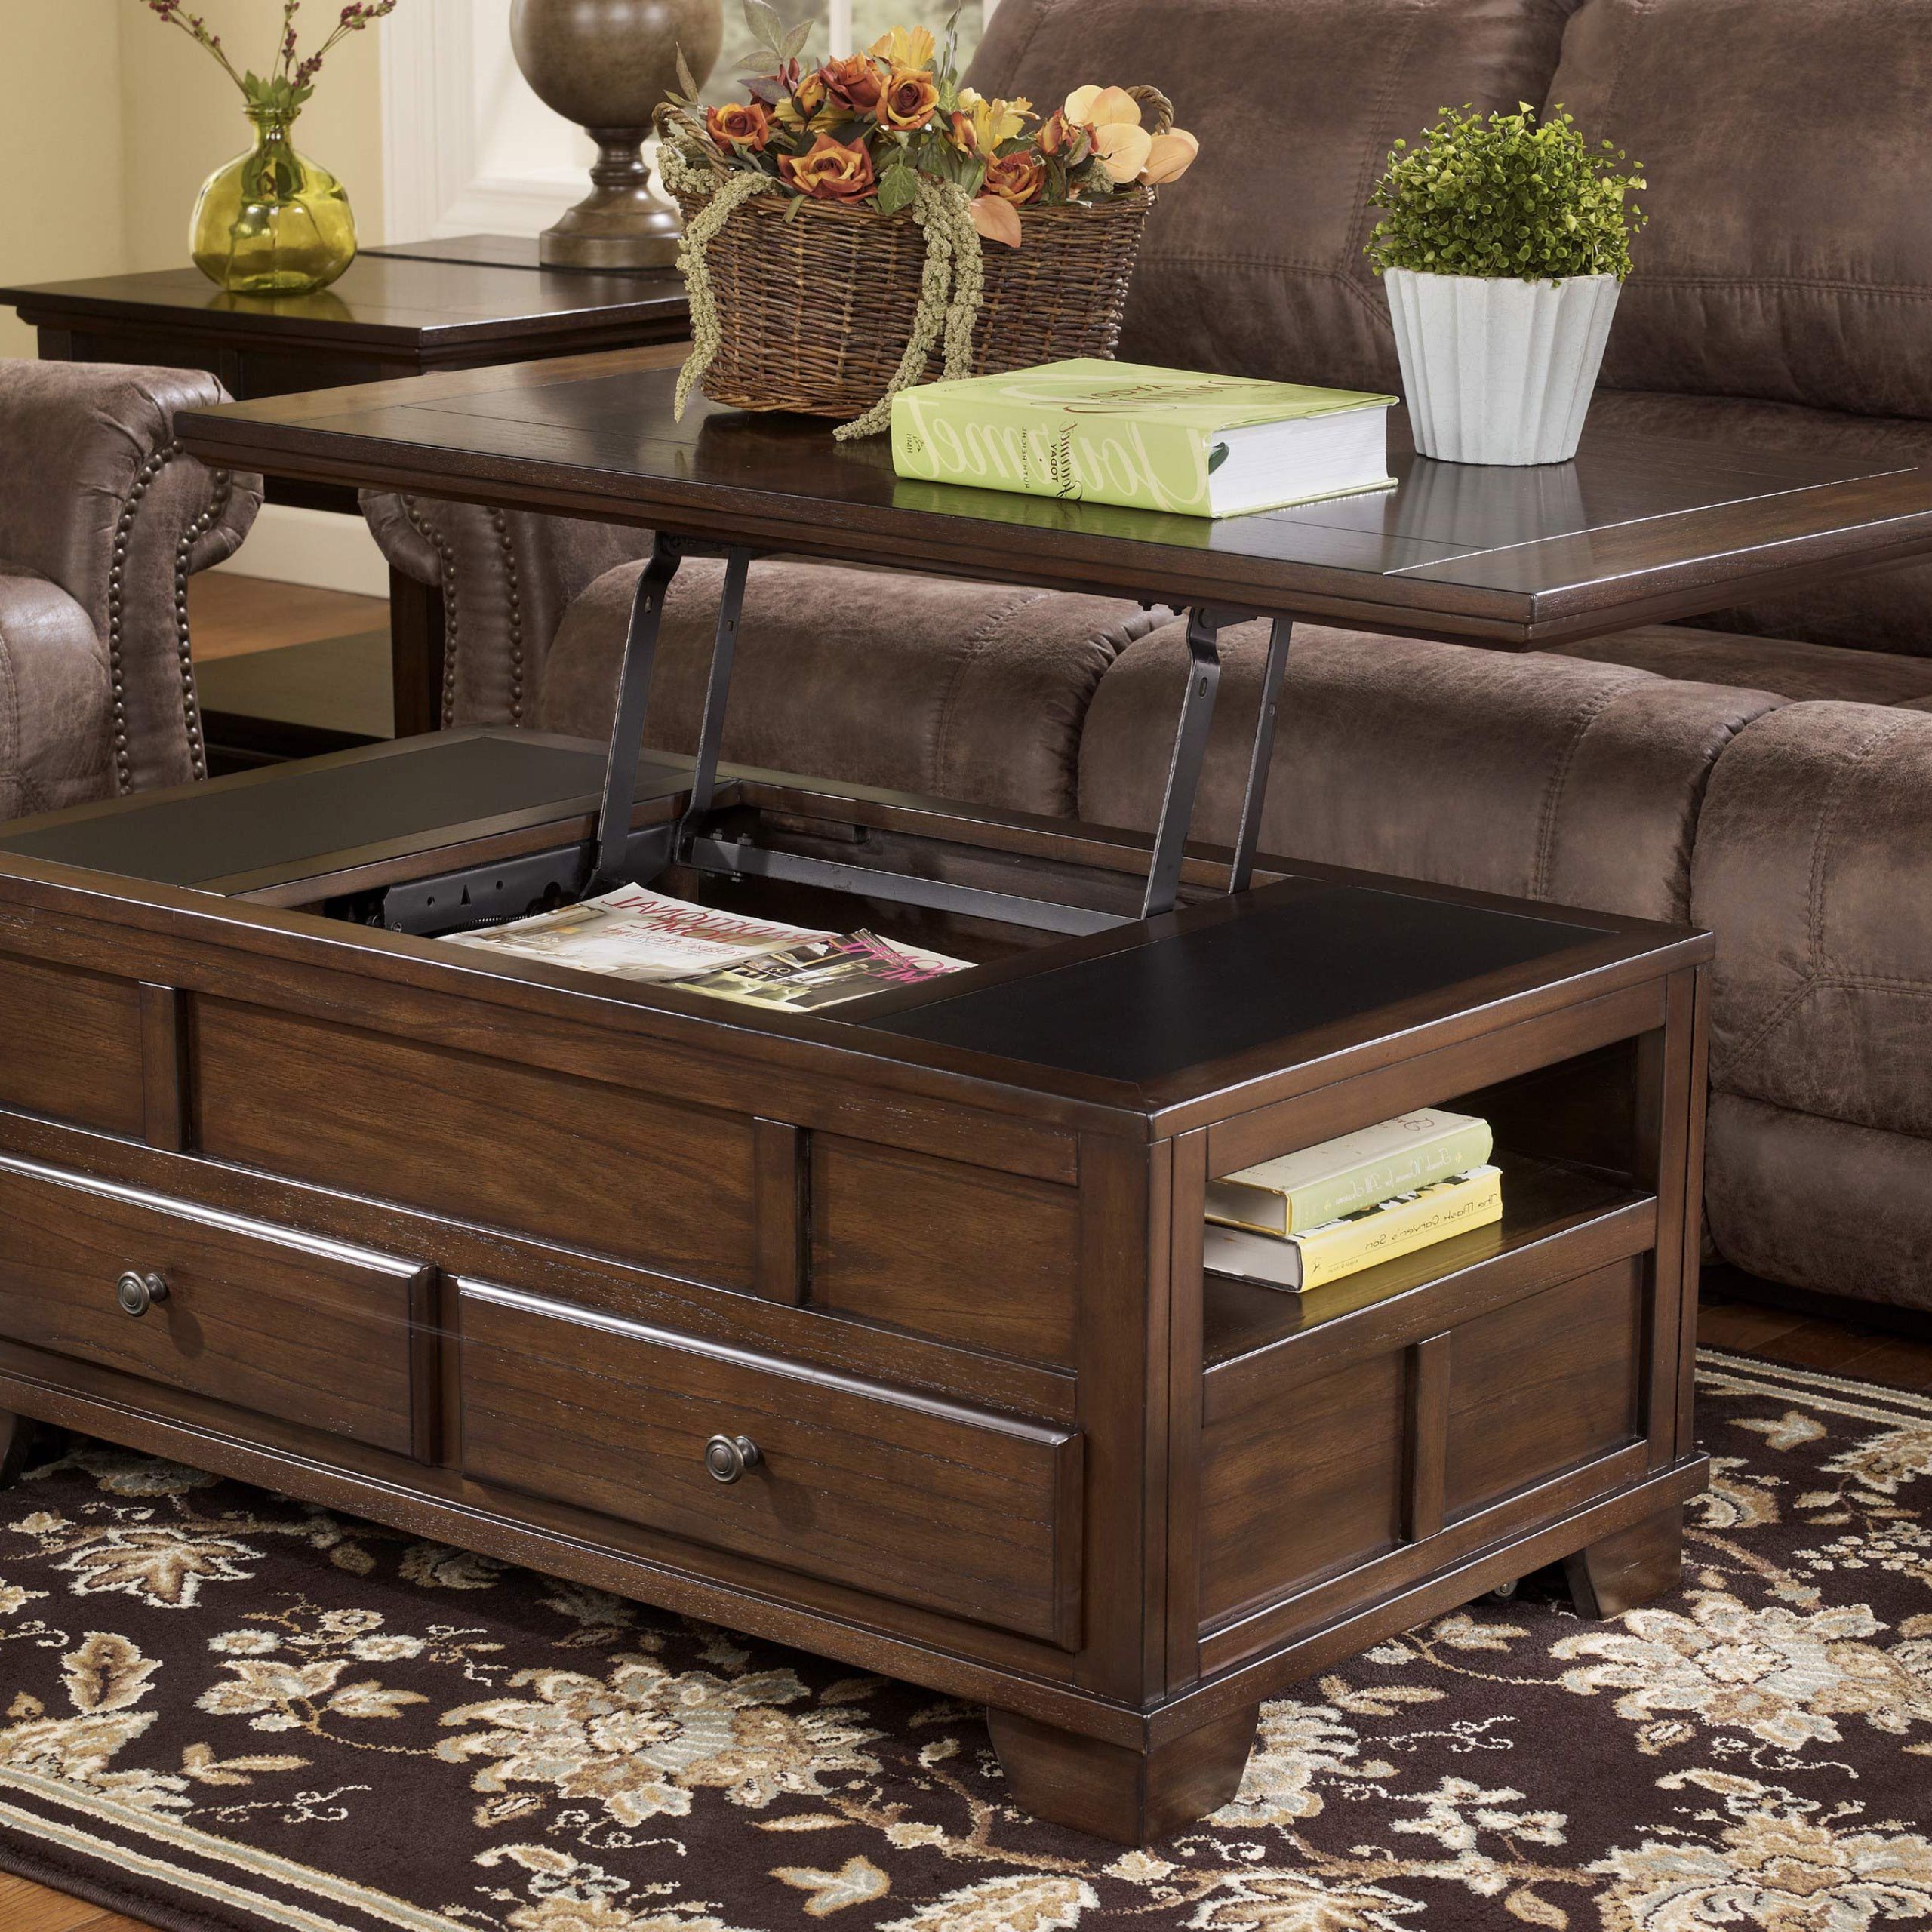 Lift Top Coffee Tables With Storage Pertaining To Lift Top Coffee Tables With Storage (Gallery 5 of 20)